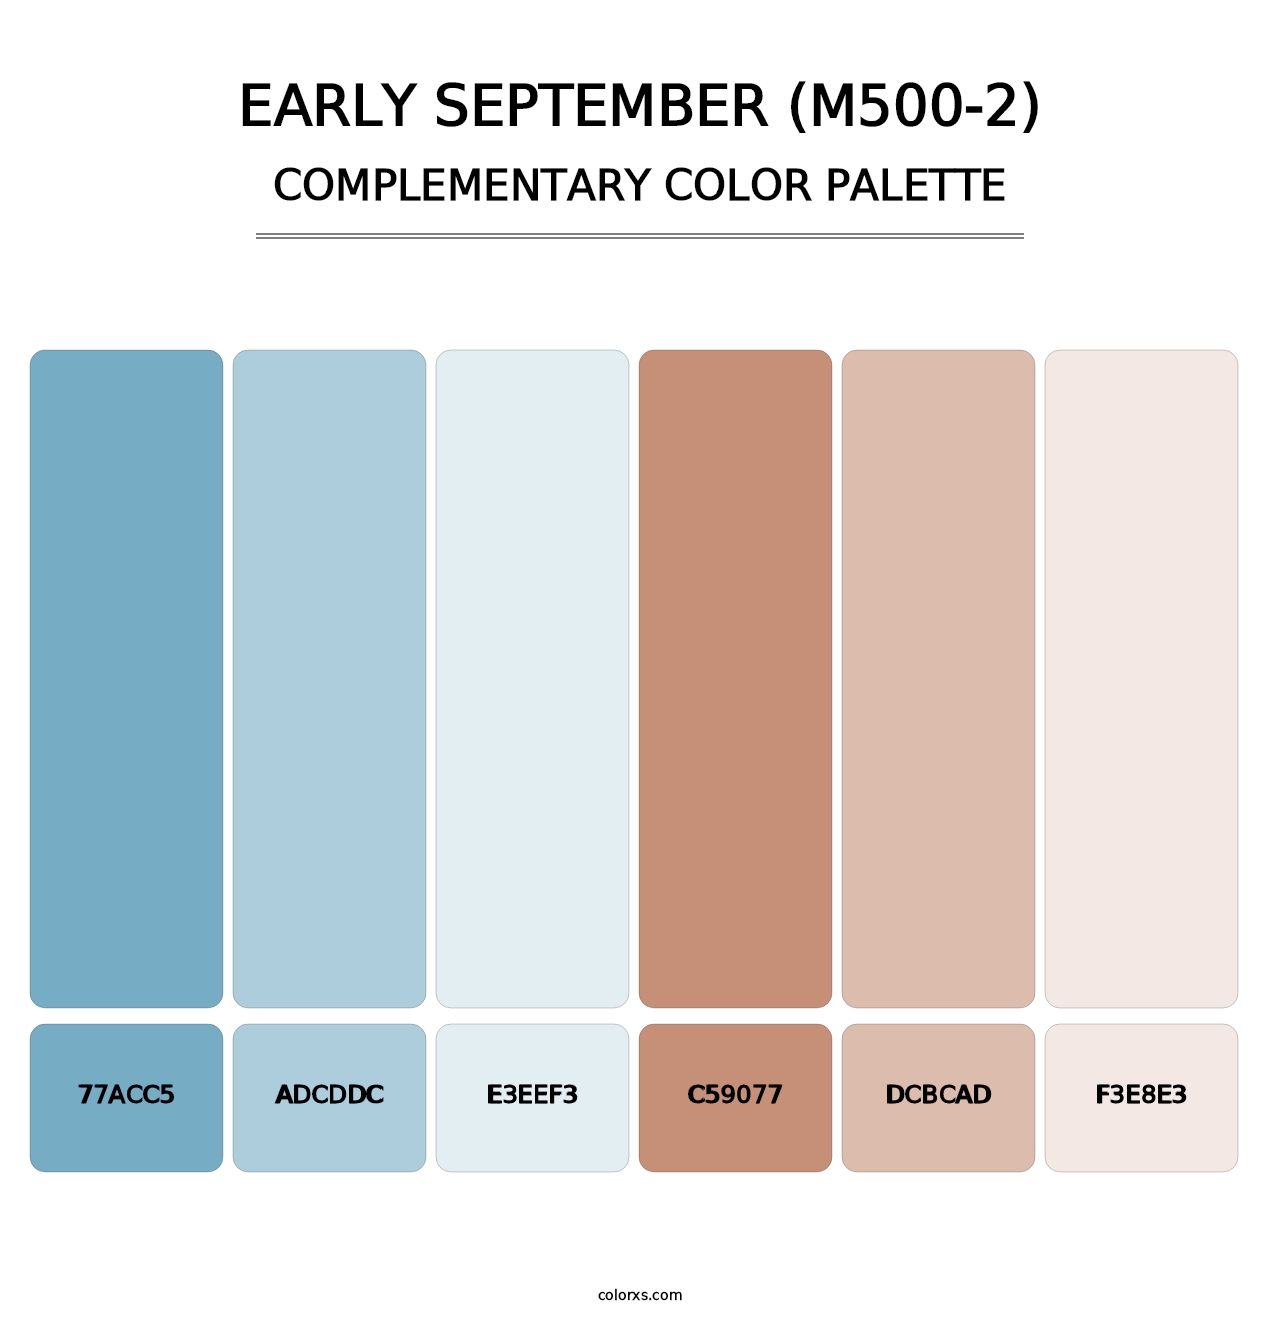 Early September (M500-2) - Complementary Color Palette